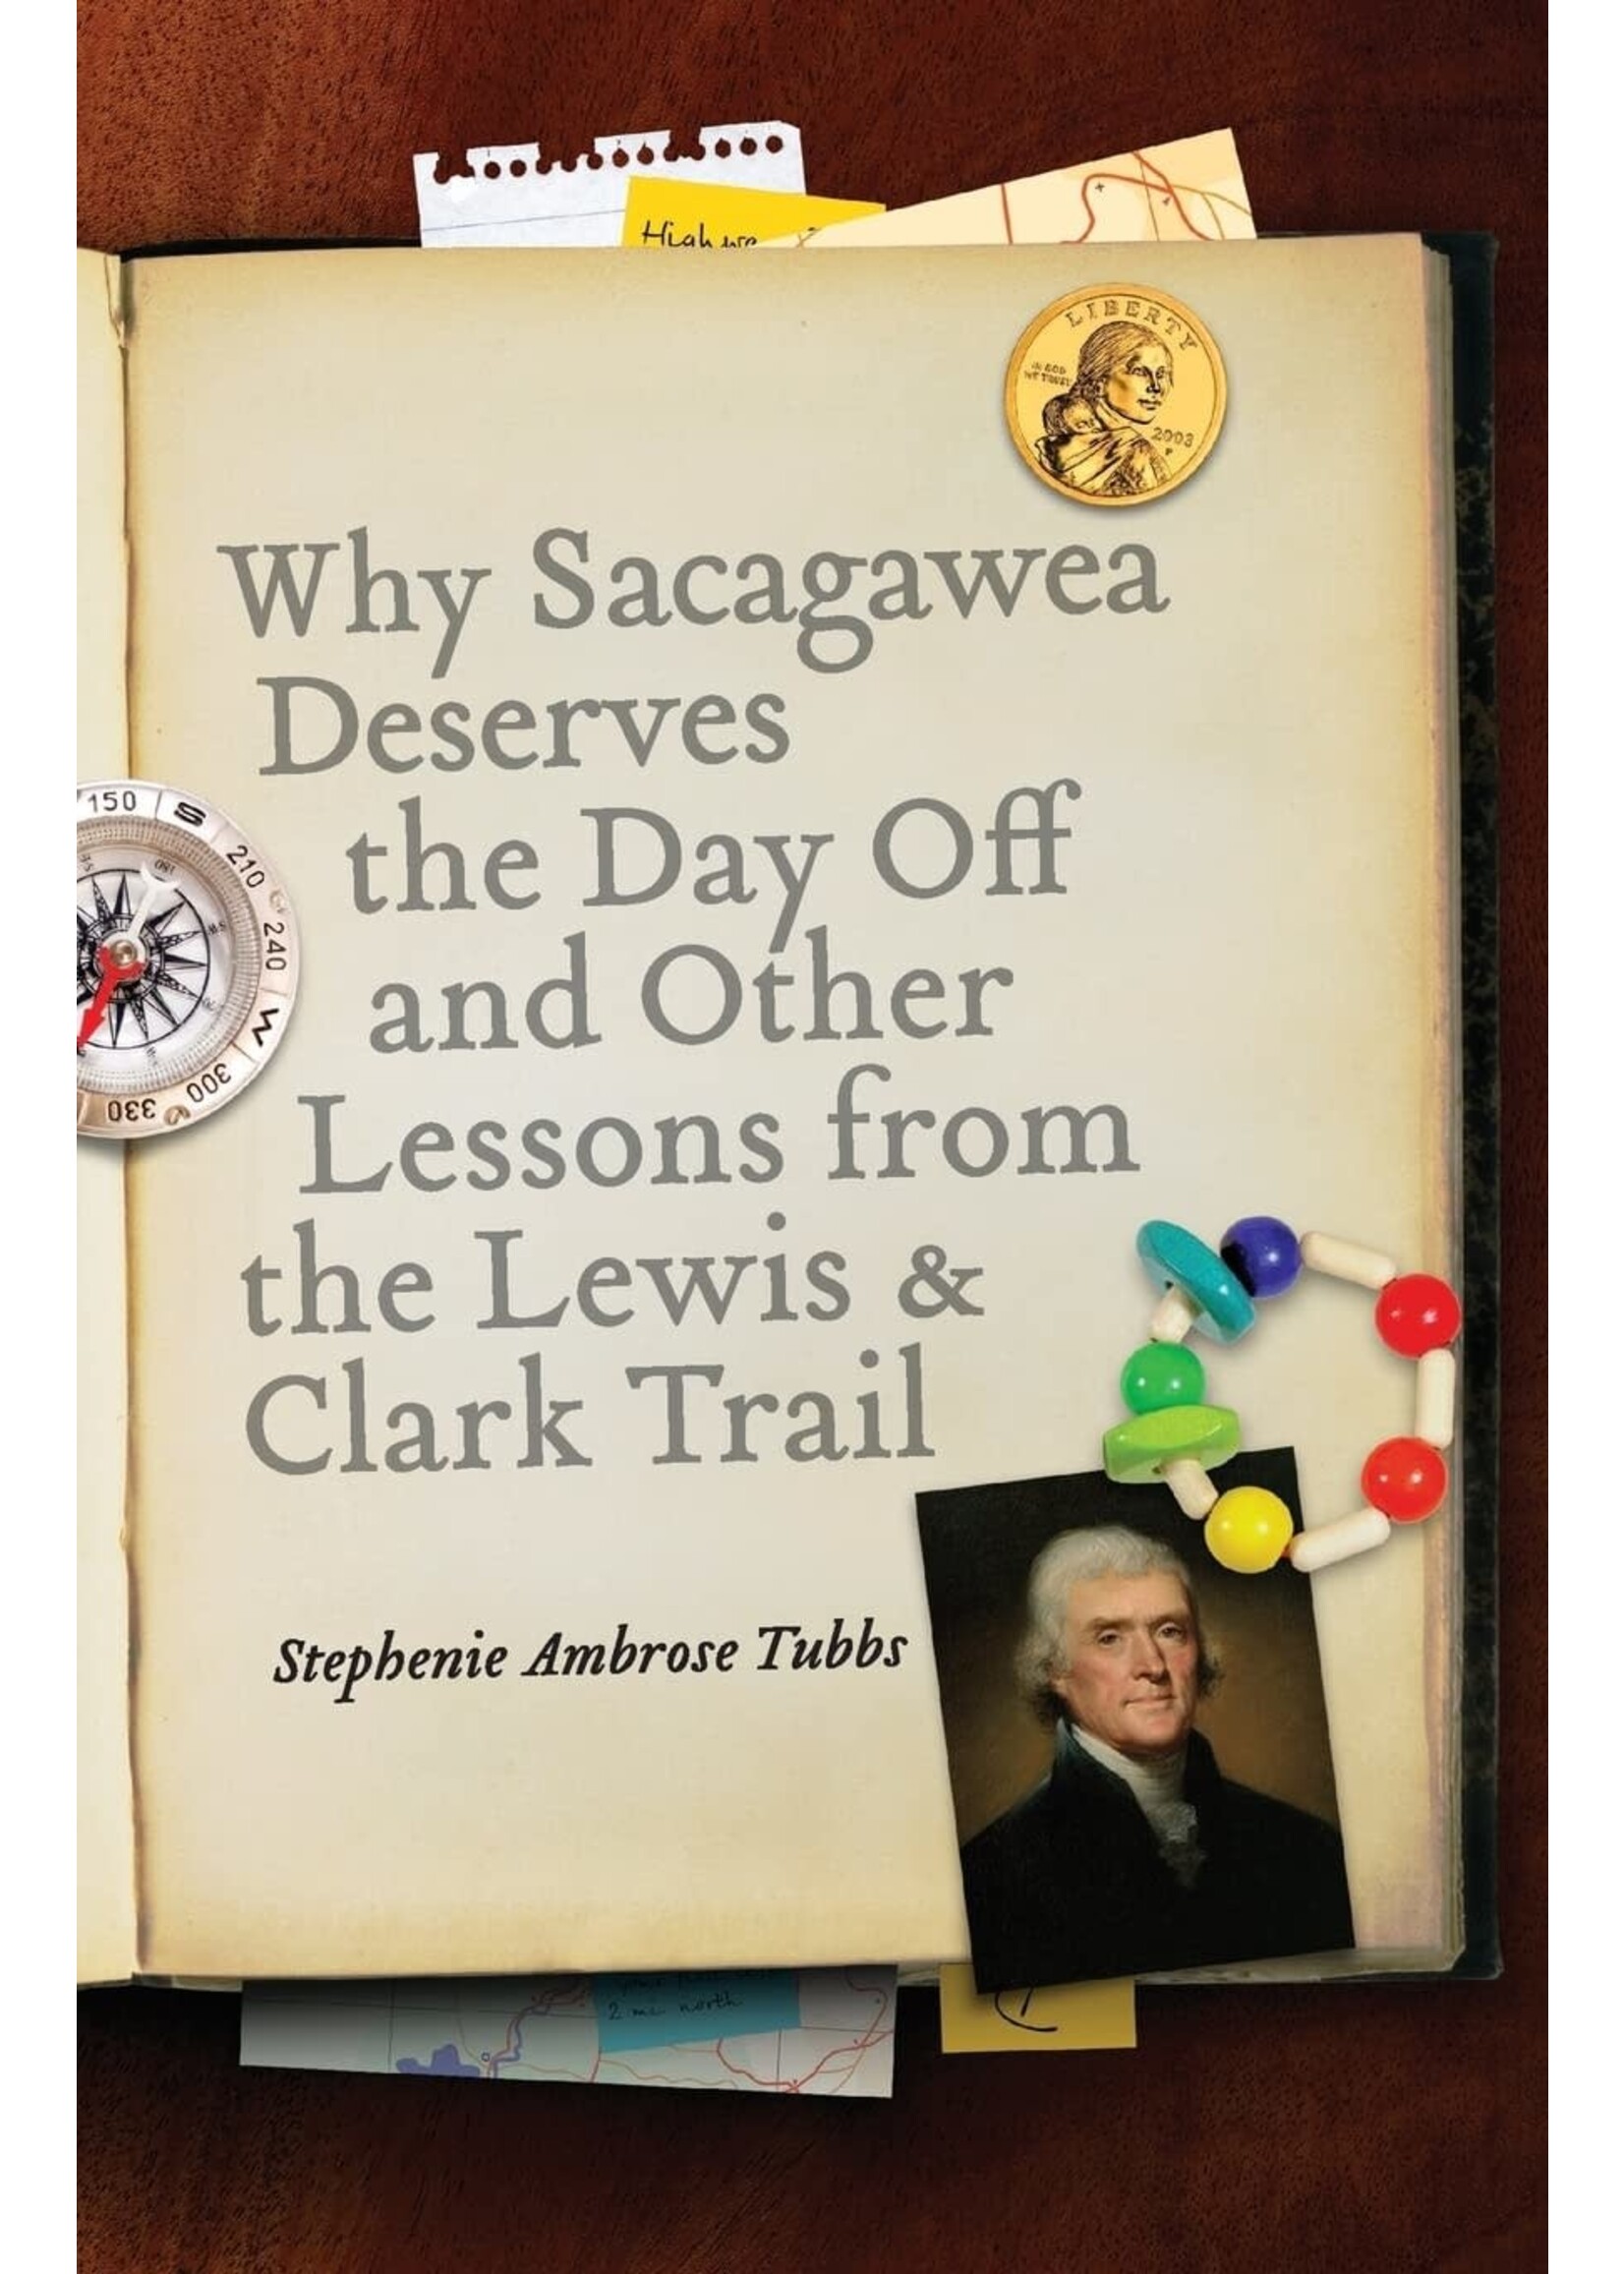 Why Sacagawea Deserves the Day Off and Other Lessons From the Lewis & Clark Trail